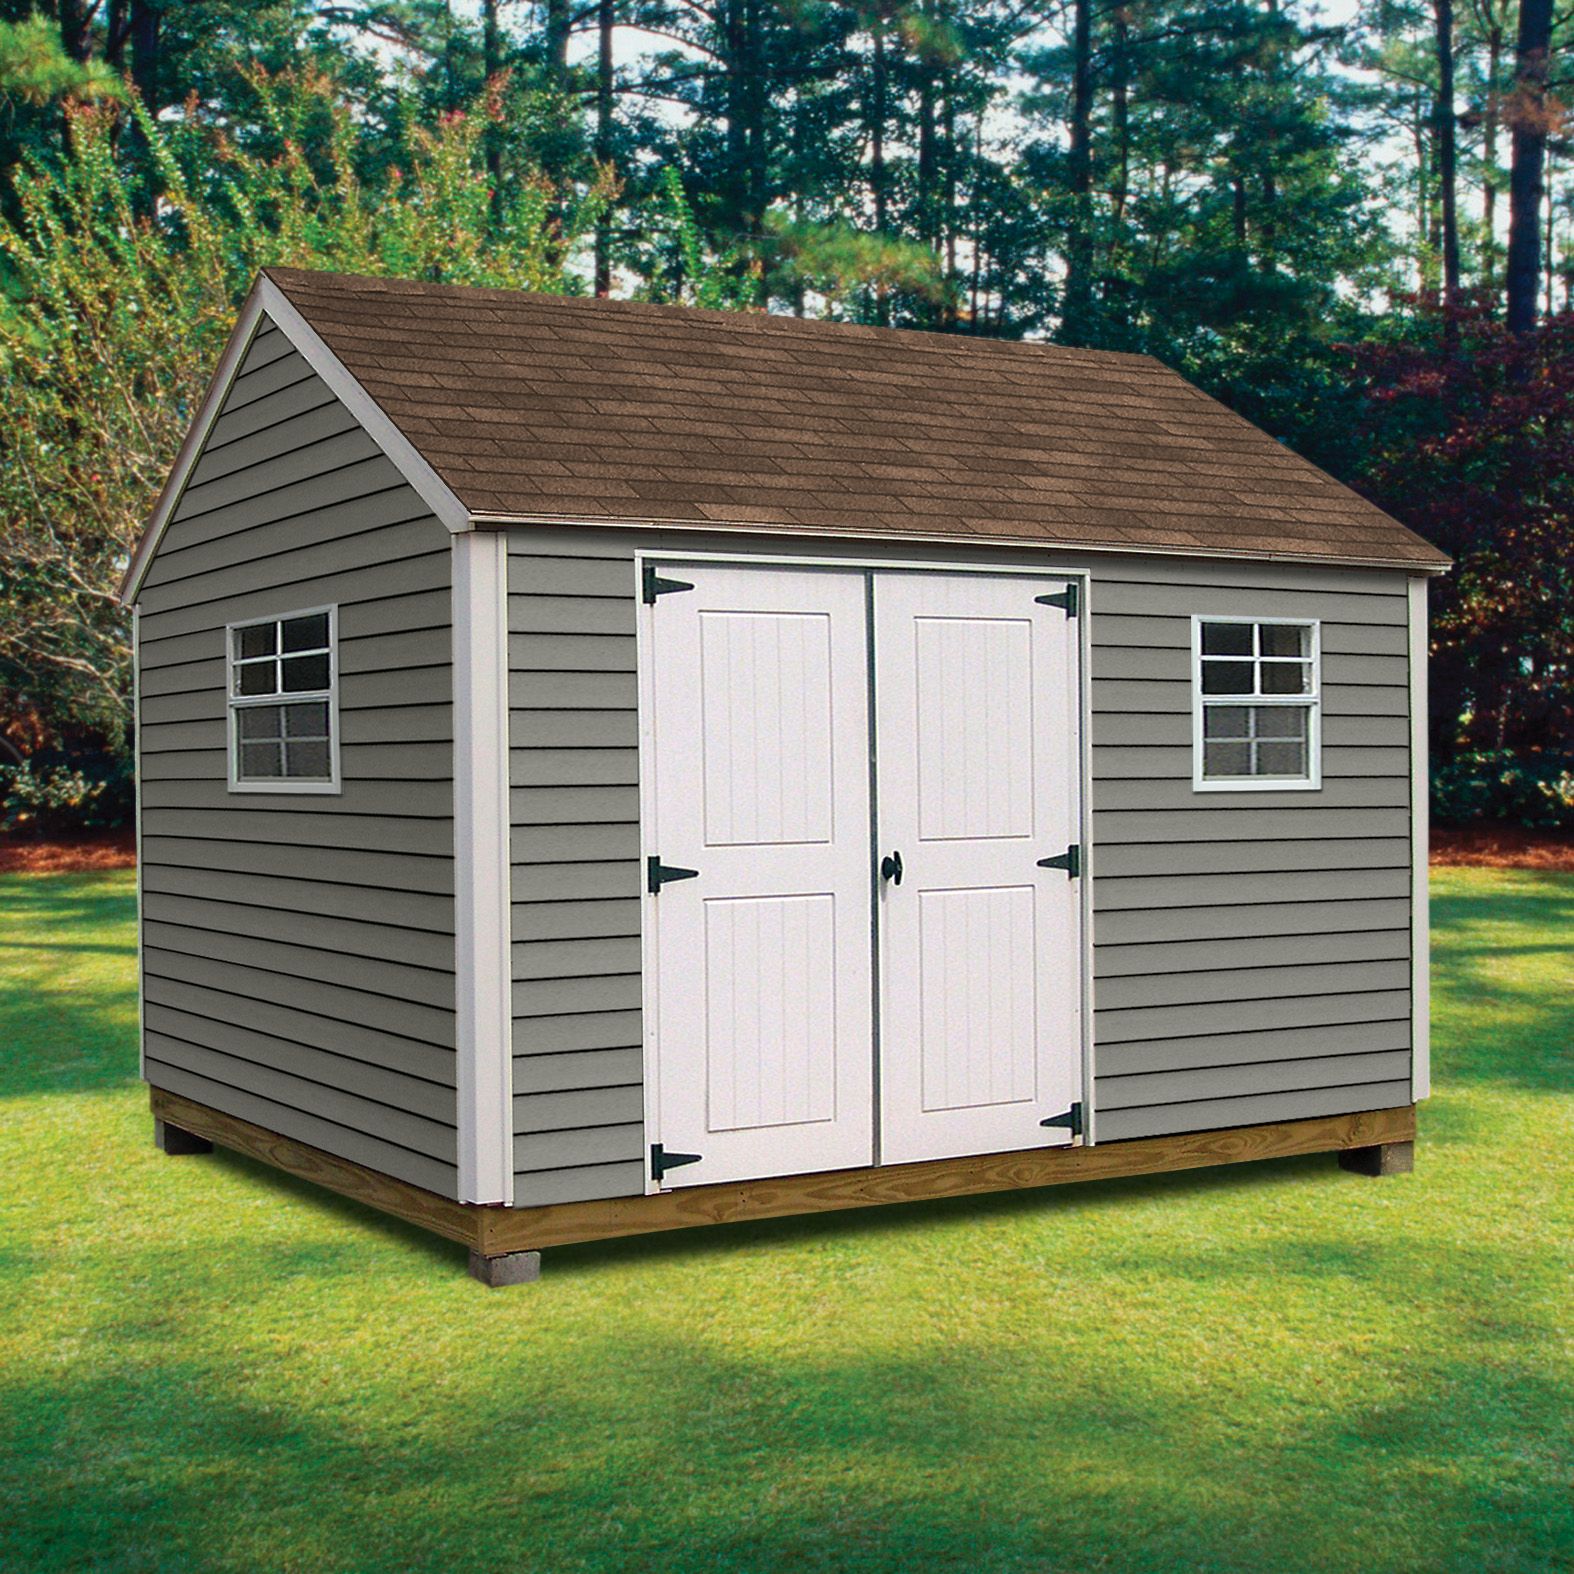 Rubbermaid Sheds &amp; Storage Buildings with Free Shipping